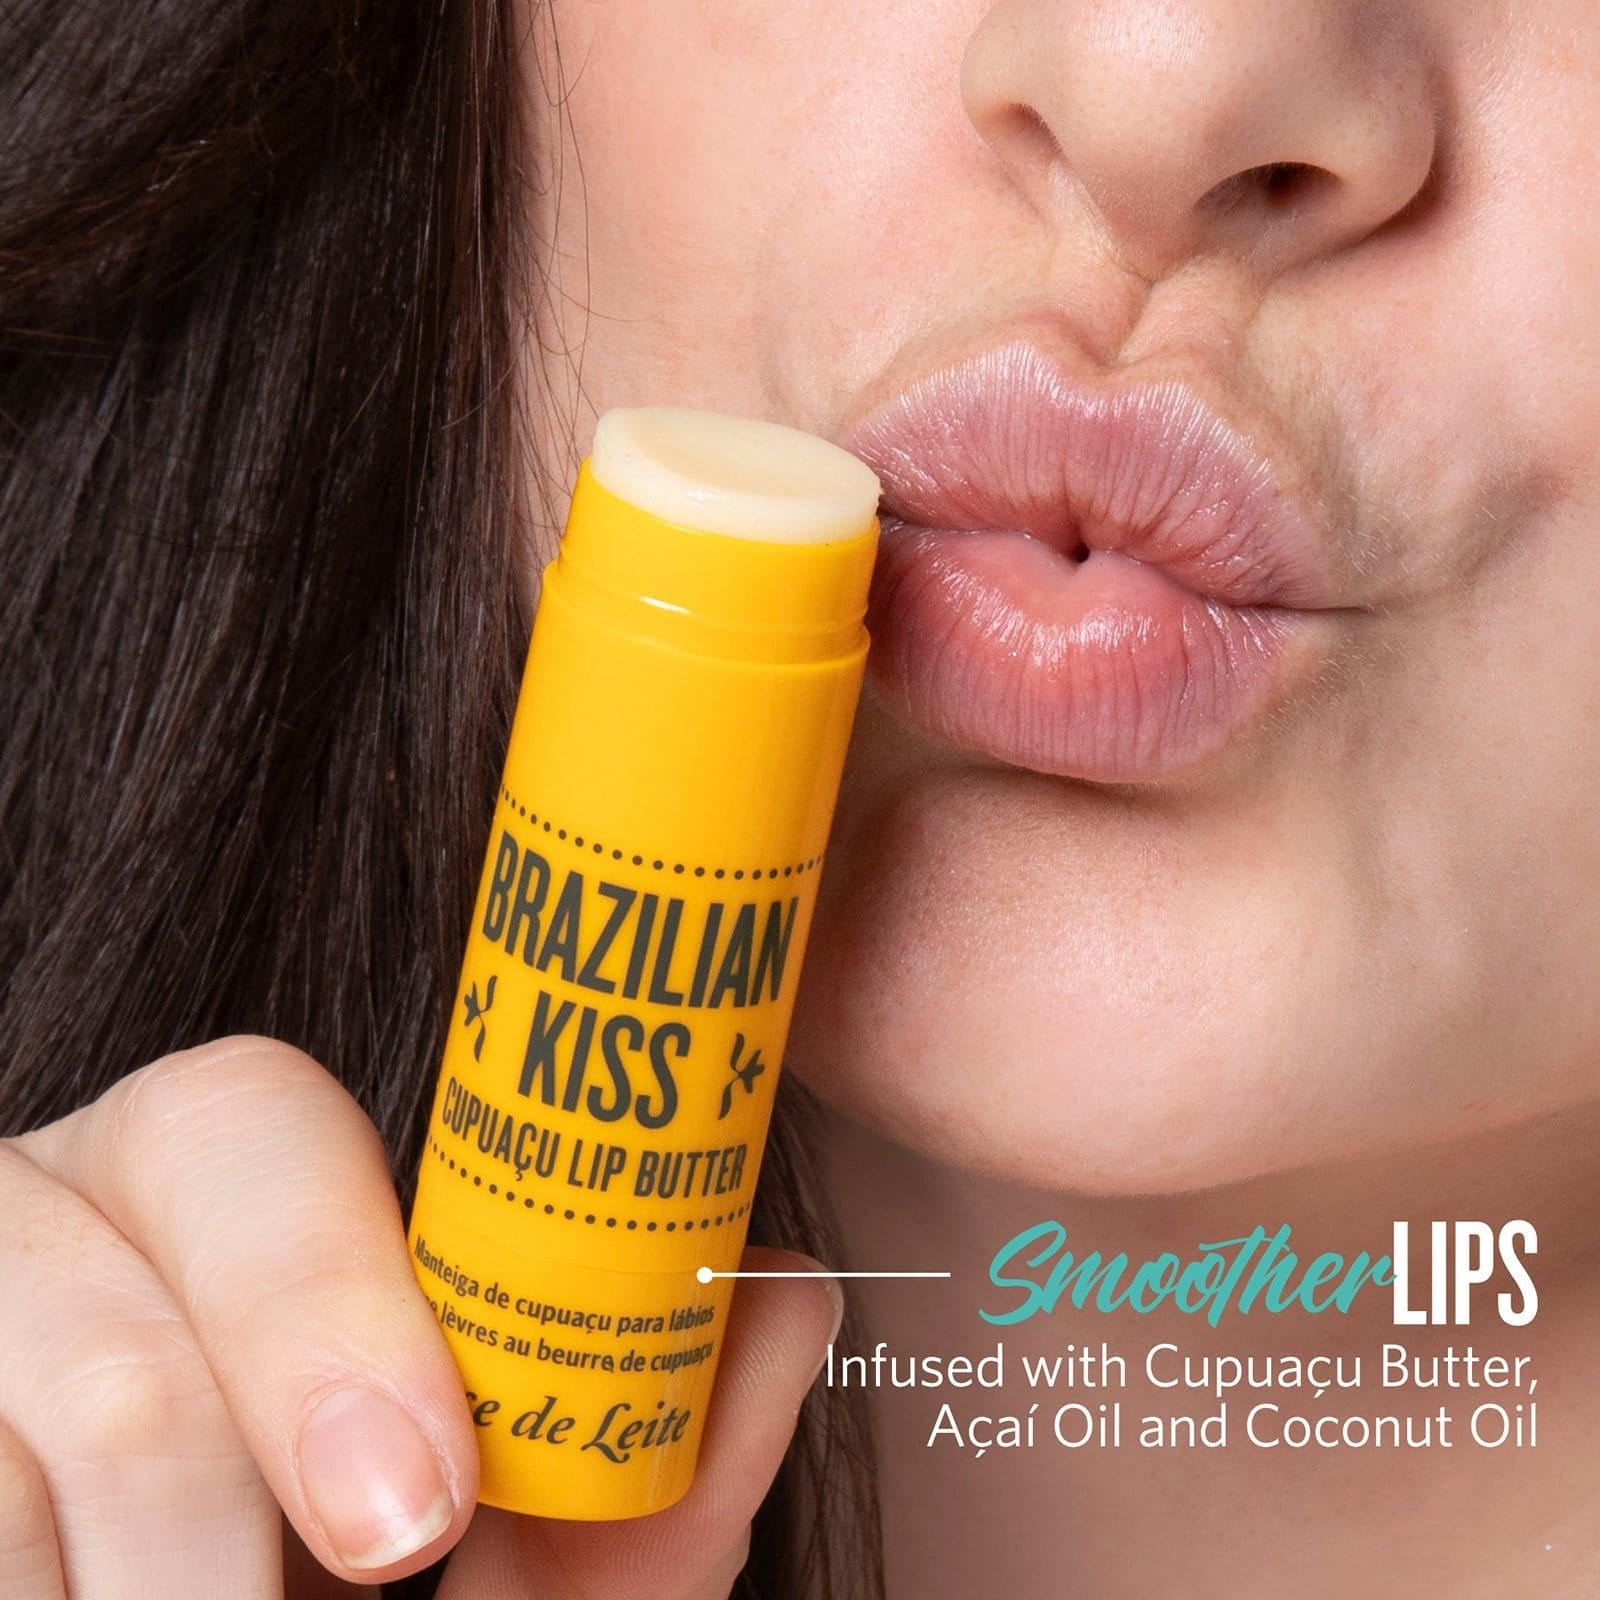 Smoother lips - infused with cupuacu butter, acai oil and coconut oil